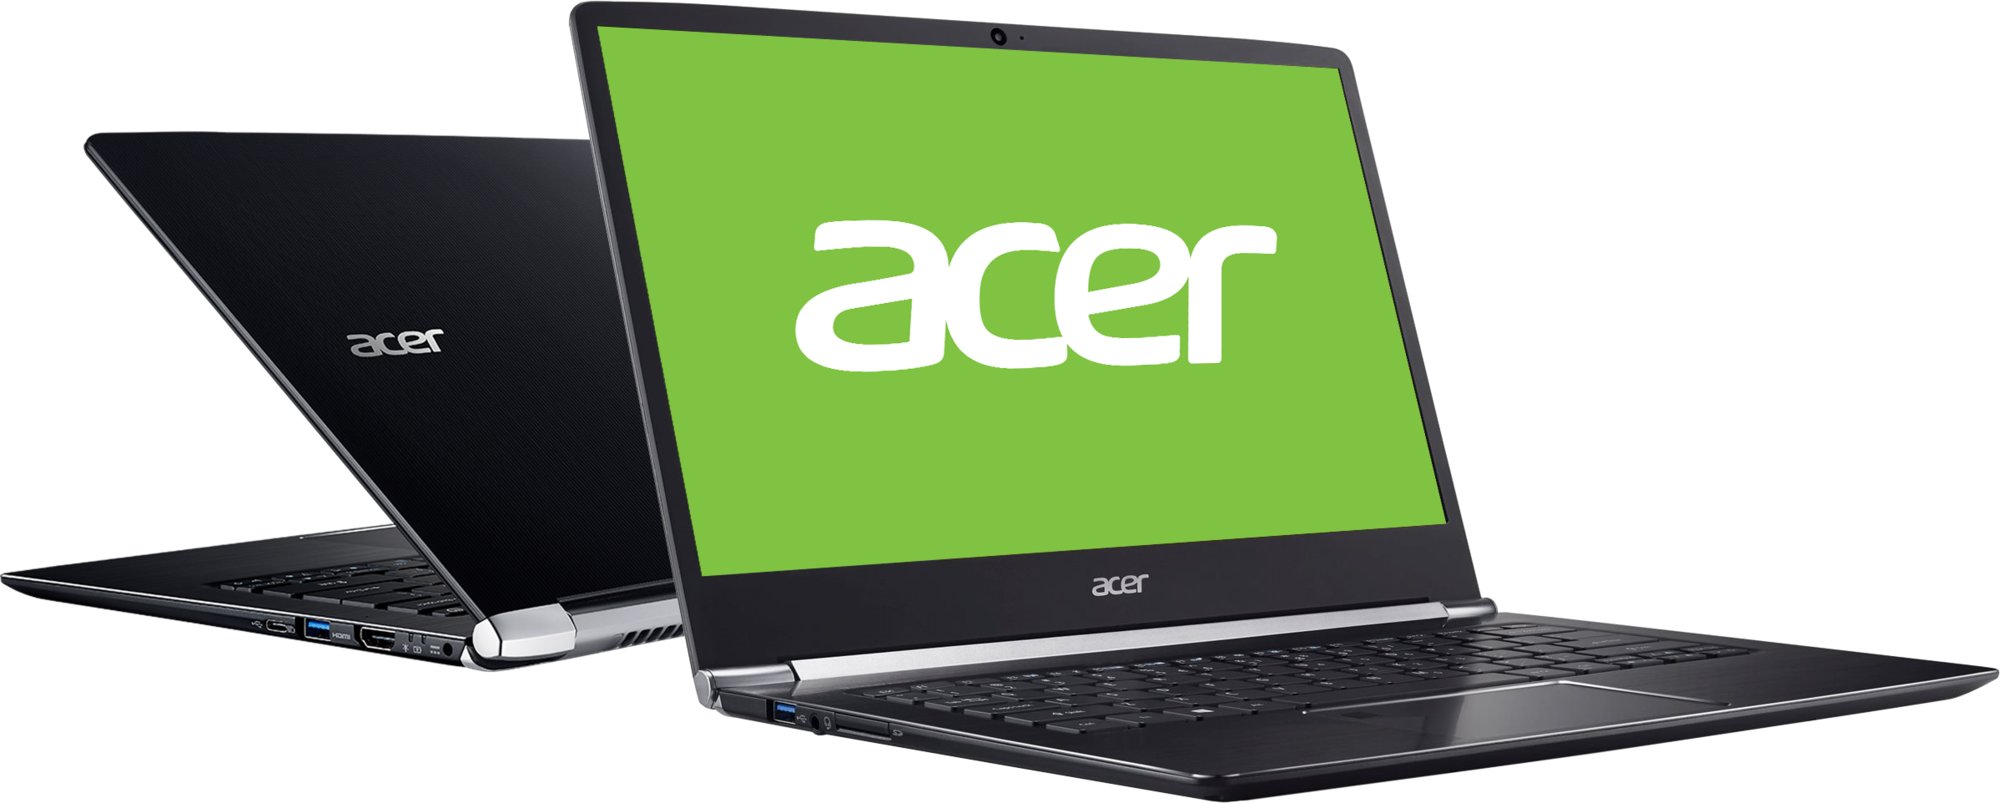 Aspire a315 51. Acer Aspire a315. Acer a315-31-c602. Acer Aspire 3 a315-51. Ноутбук Acer a315 31 c602.